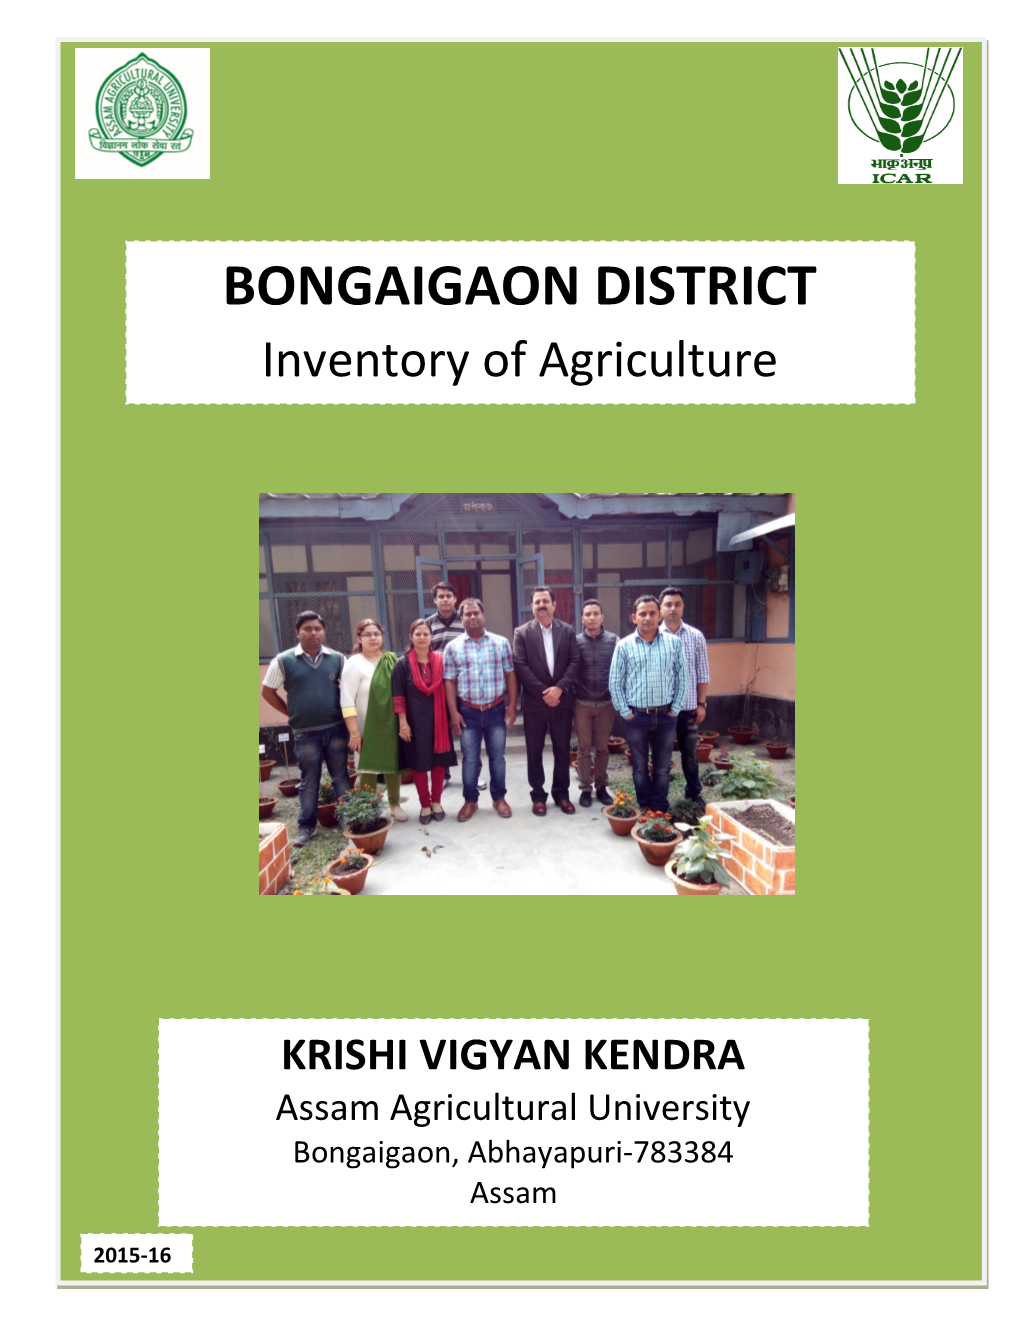 BONGAIGAON DISTRICT Inventory of Agriculture